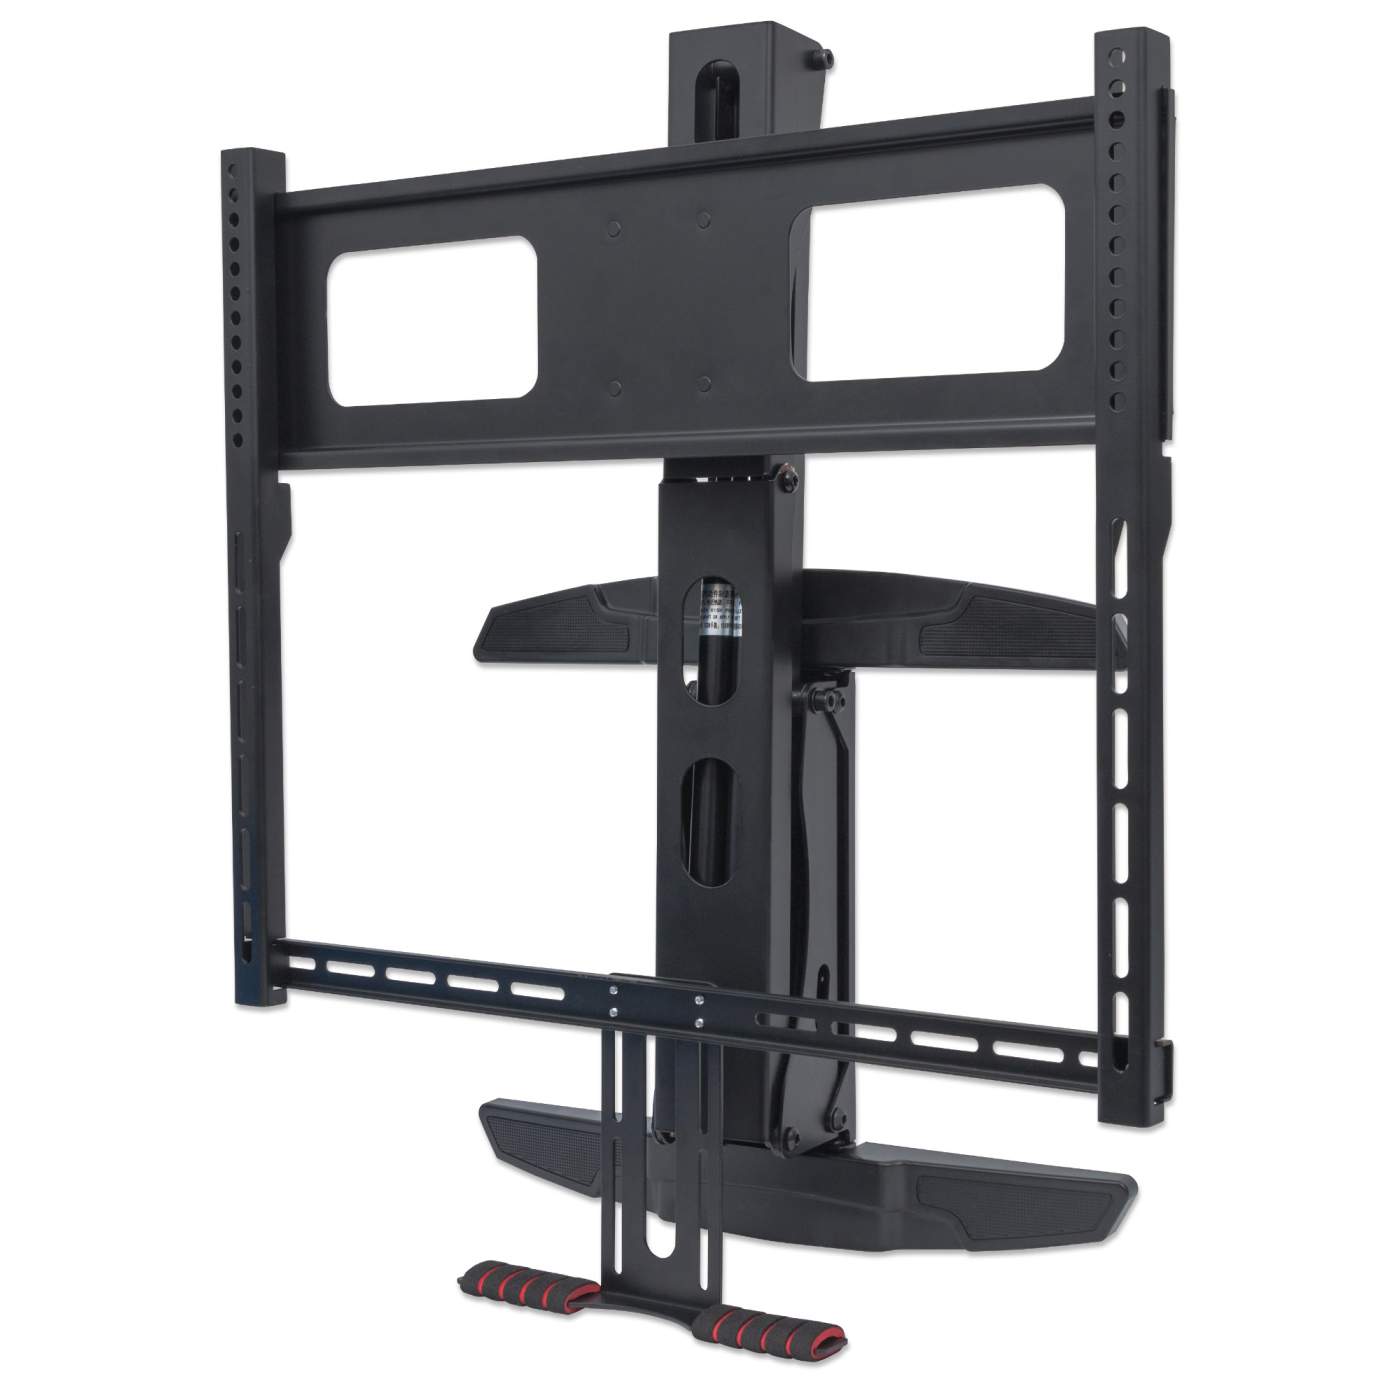 Above-Fireplace Full-Motion Mount, for 40 - 70 inch TVs up to 77